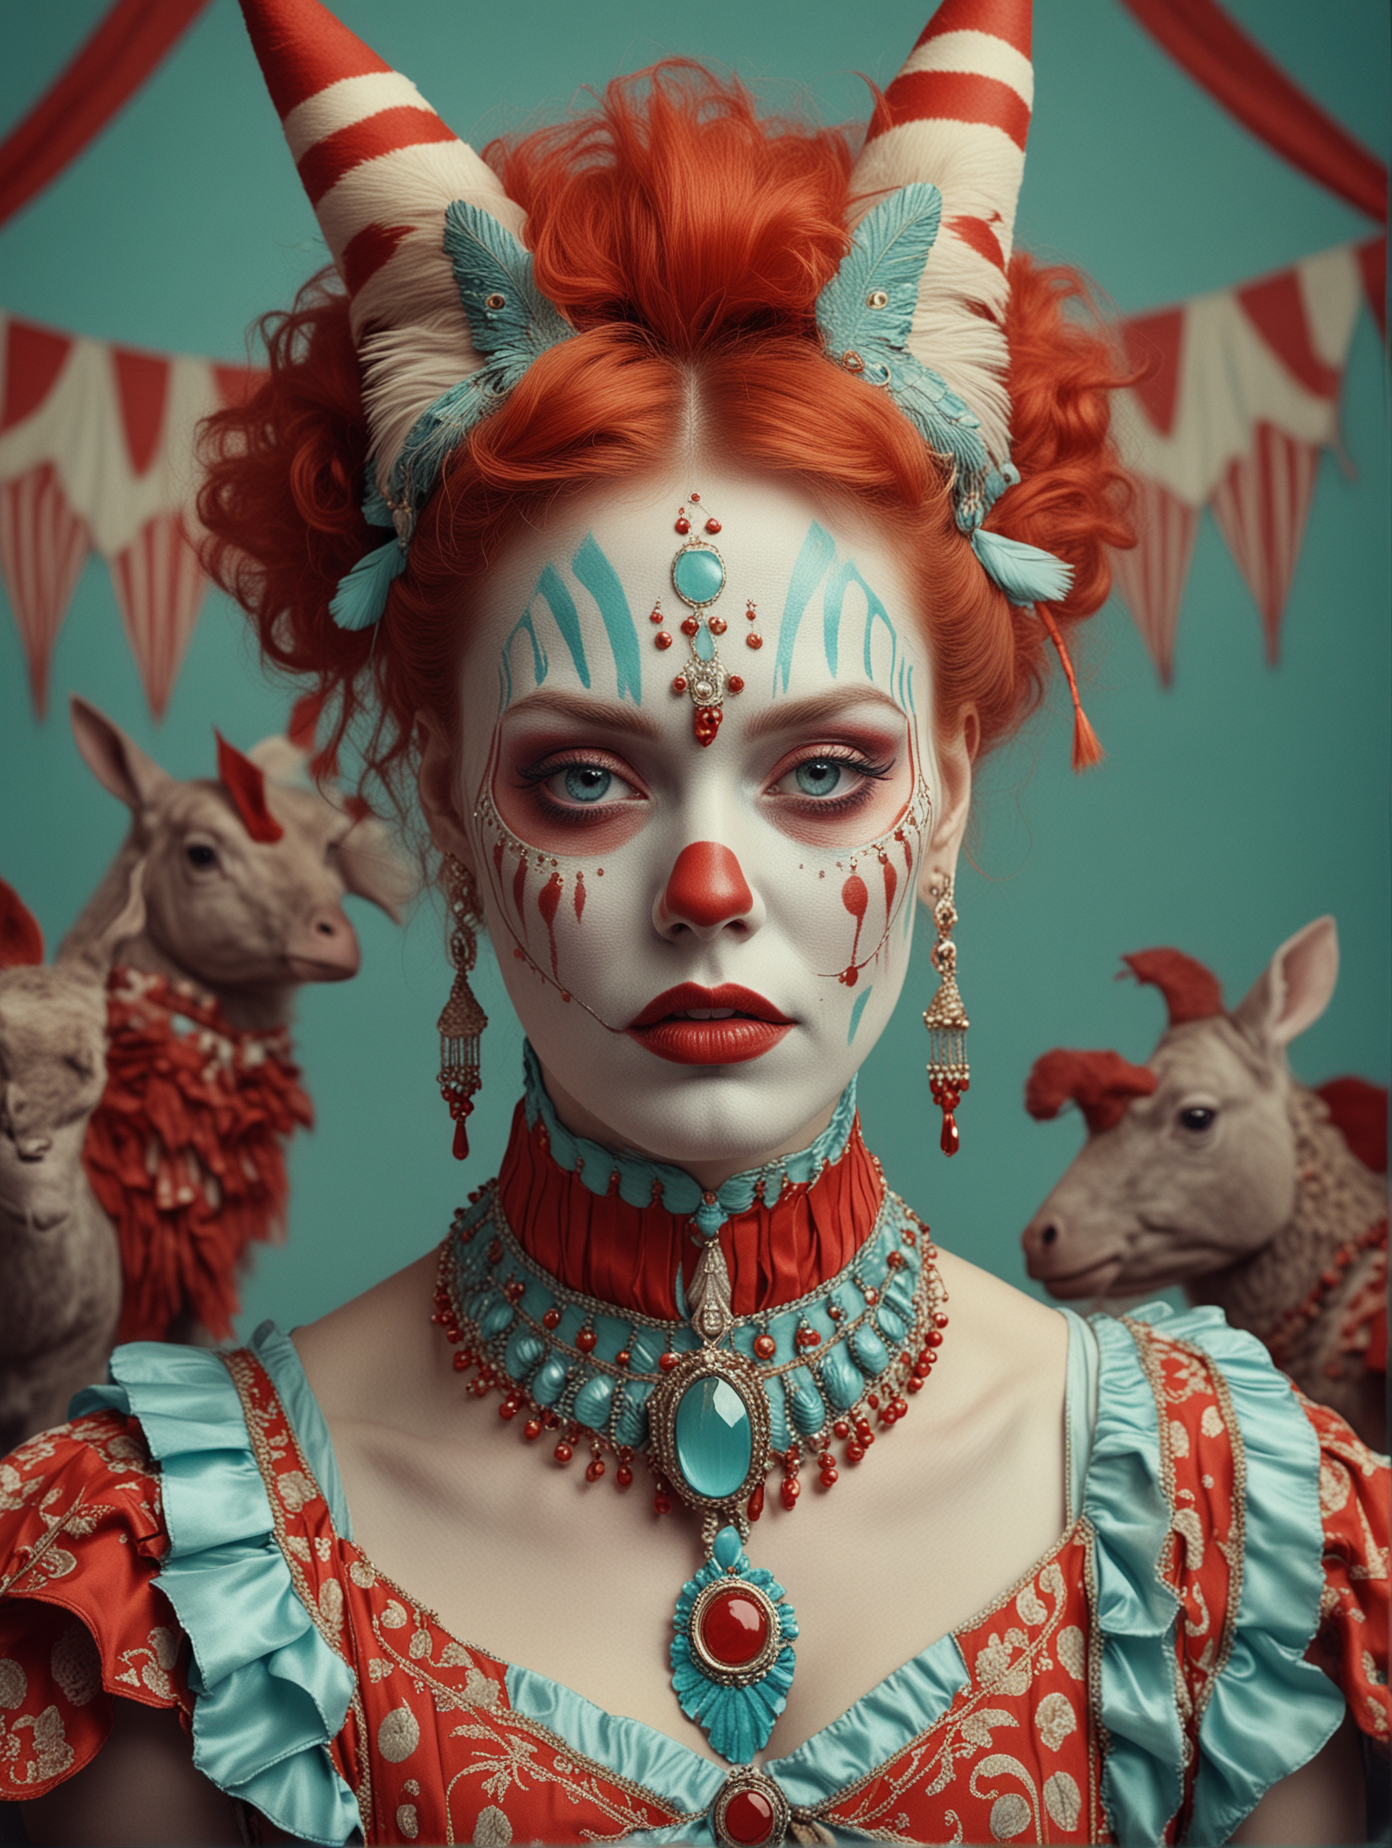 circus, in the style of whimsical yet eerie animal symbolism, light cyan and red palette, close up portraiture, nature-inspired pieces, elaborate costumes, ultra details